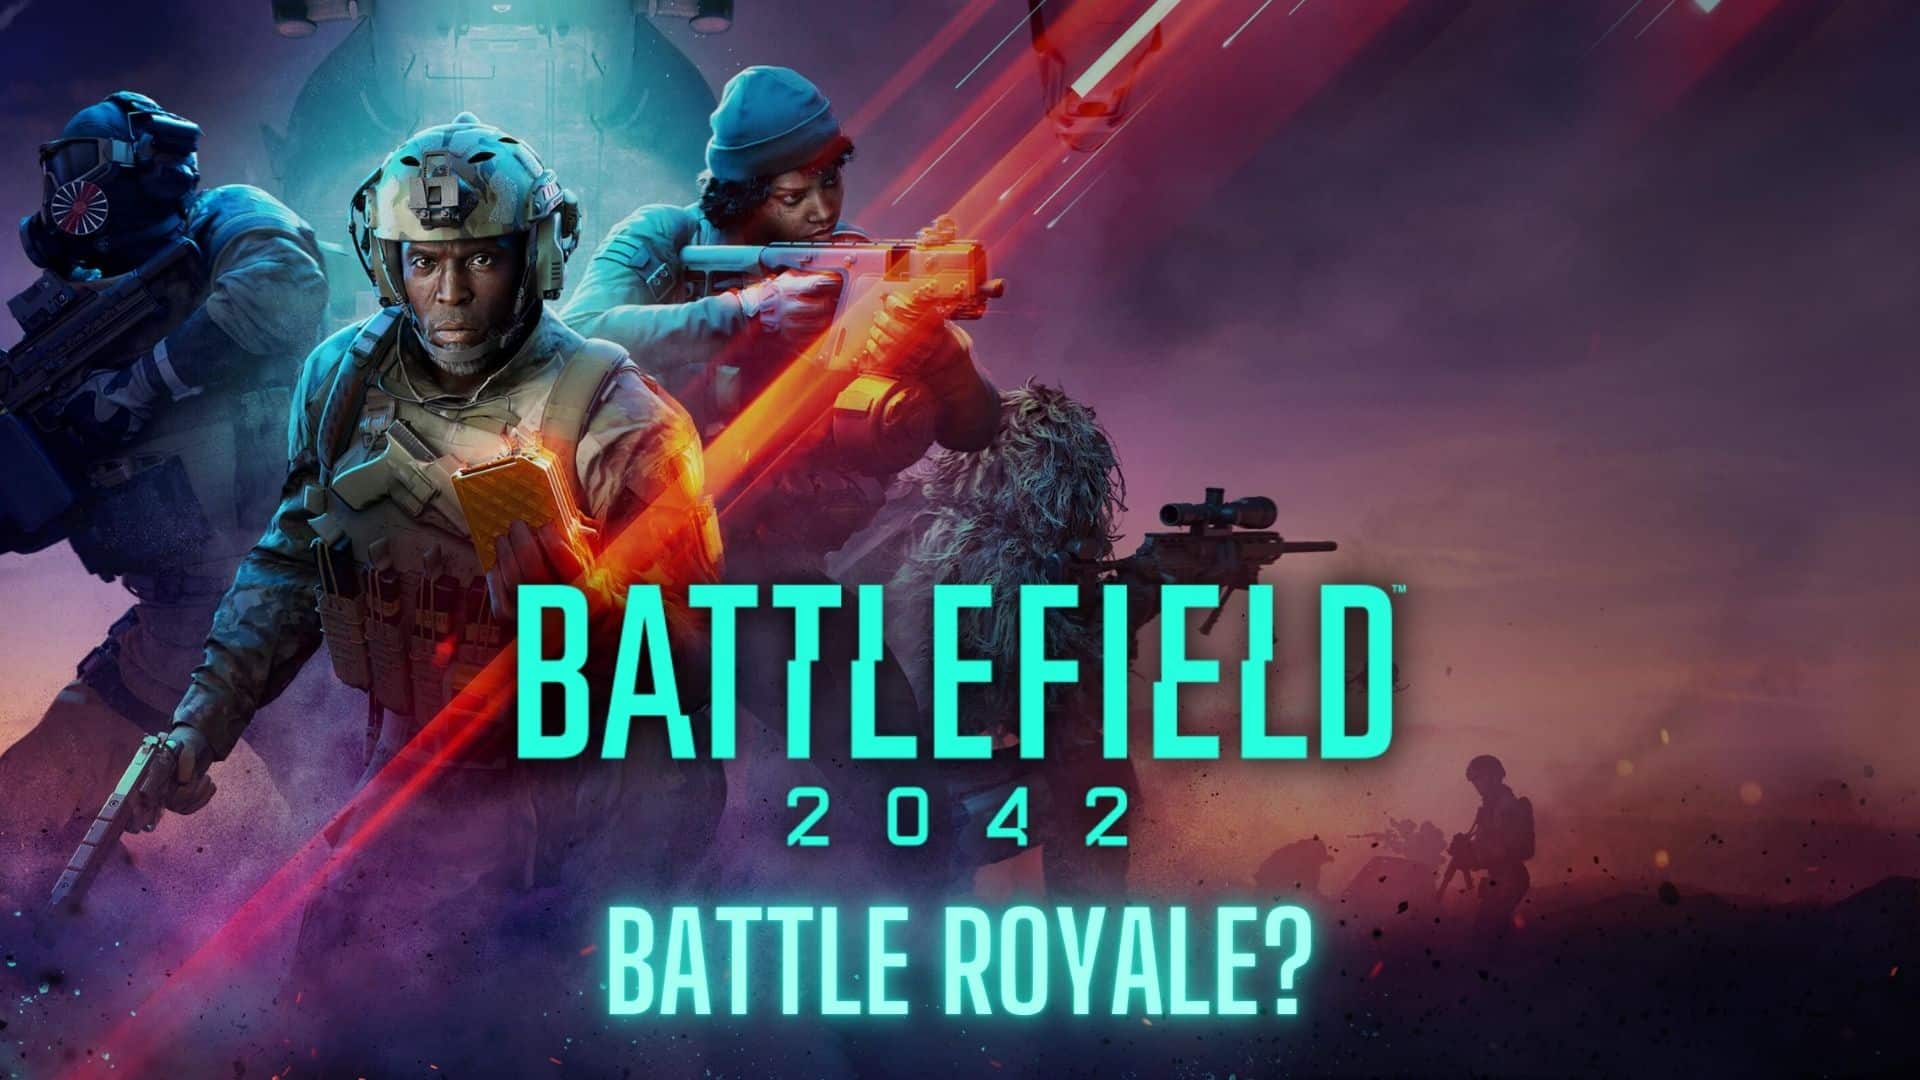 Will Battlefield 2042 Have A Battle Royale Mode?